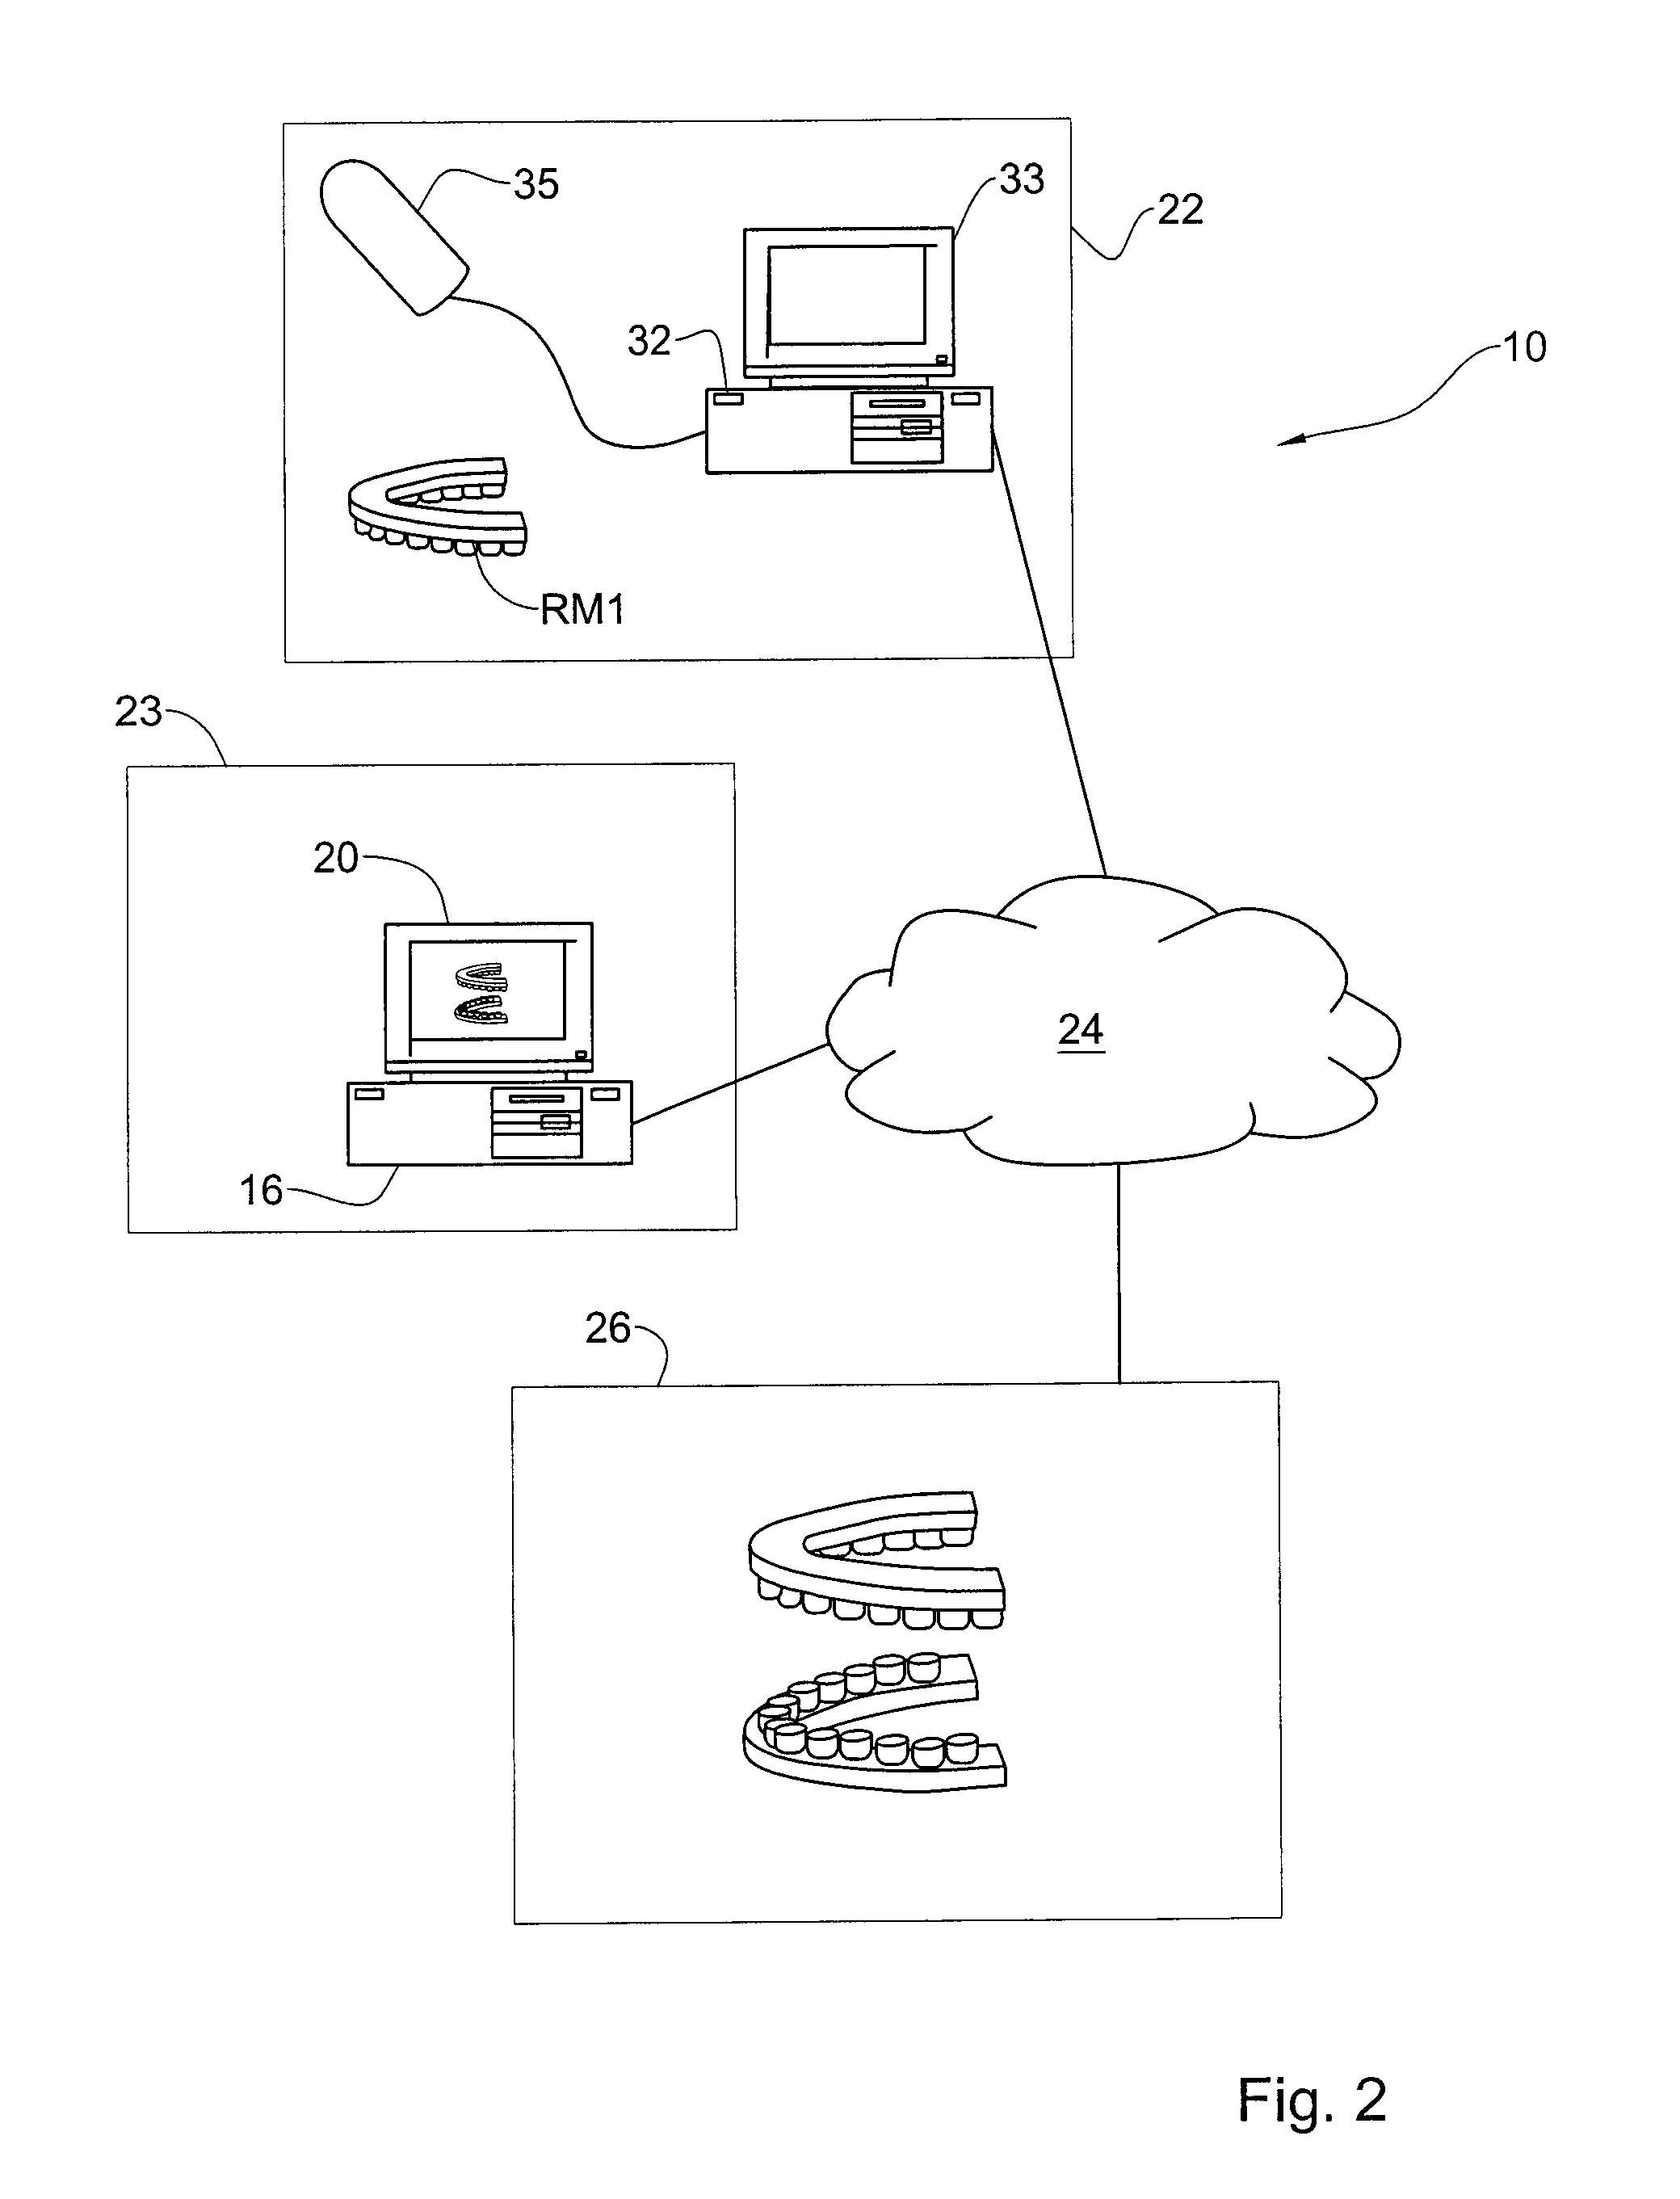 Methods and systems for creating and interacting with three dimensional virtual models